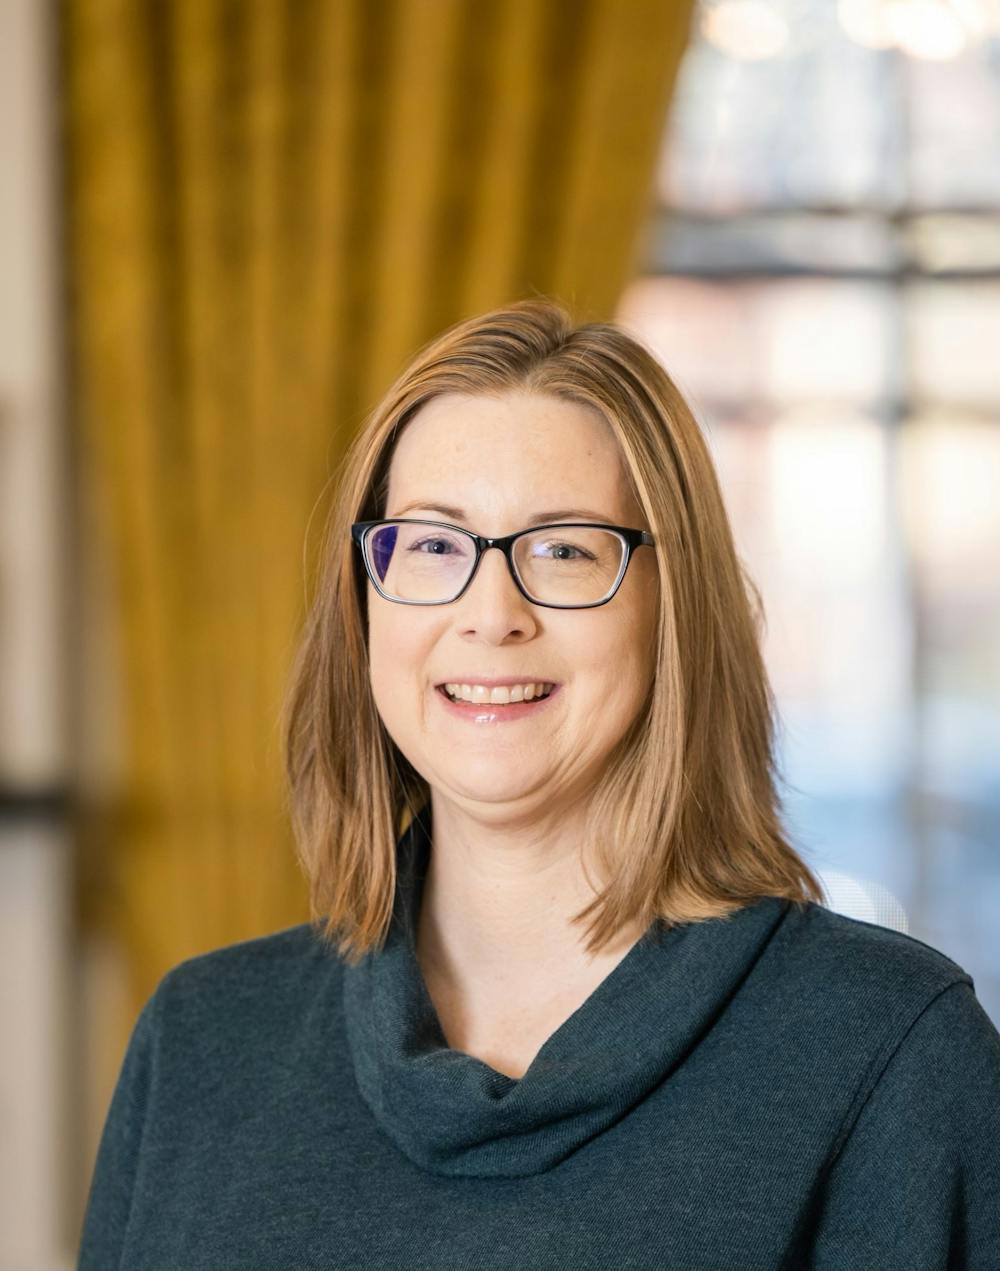 On April 5, Malloy will deliver her first training presentation to aid in bolstering inclusion on campus, titled “Proactive Considerations for Accessibility in Higher Education.”

Courtesy of Kristin Malloy